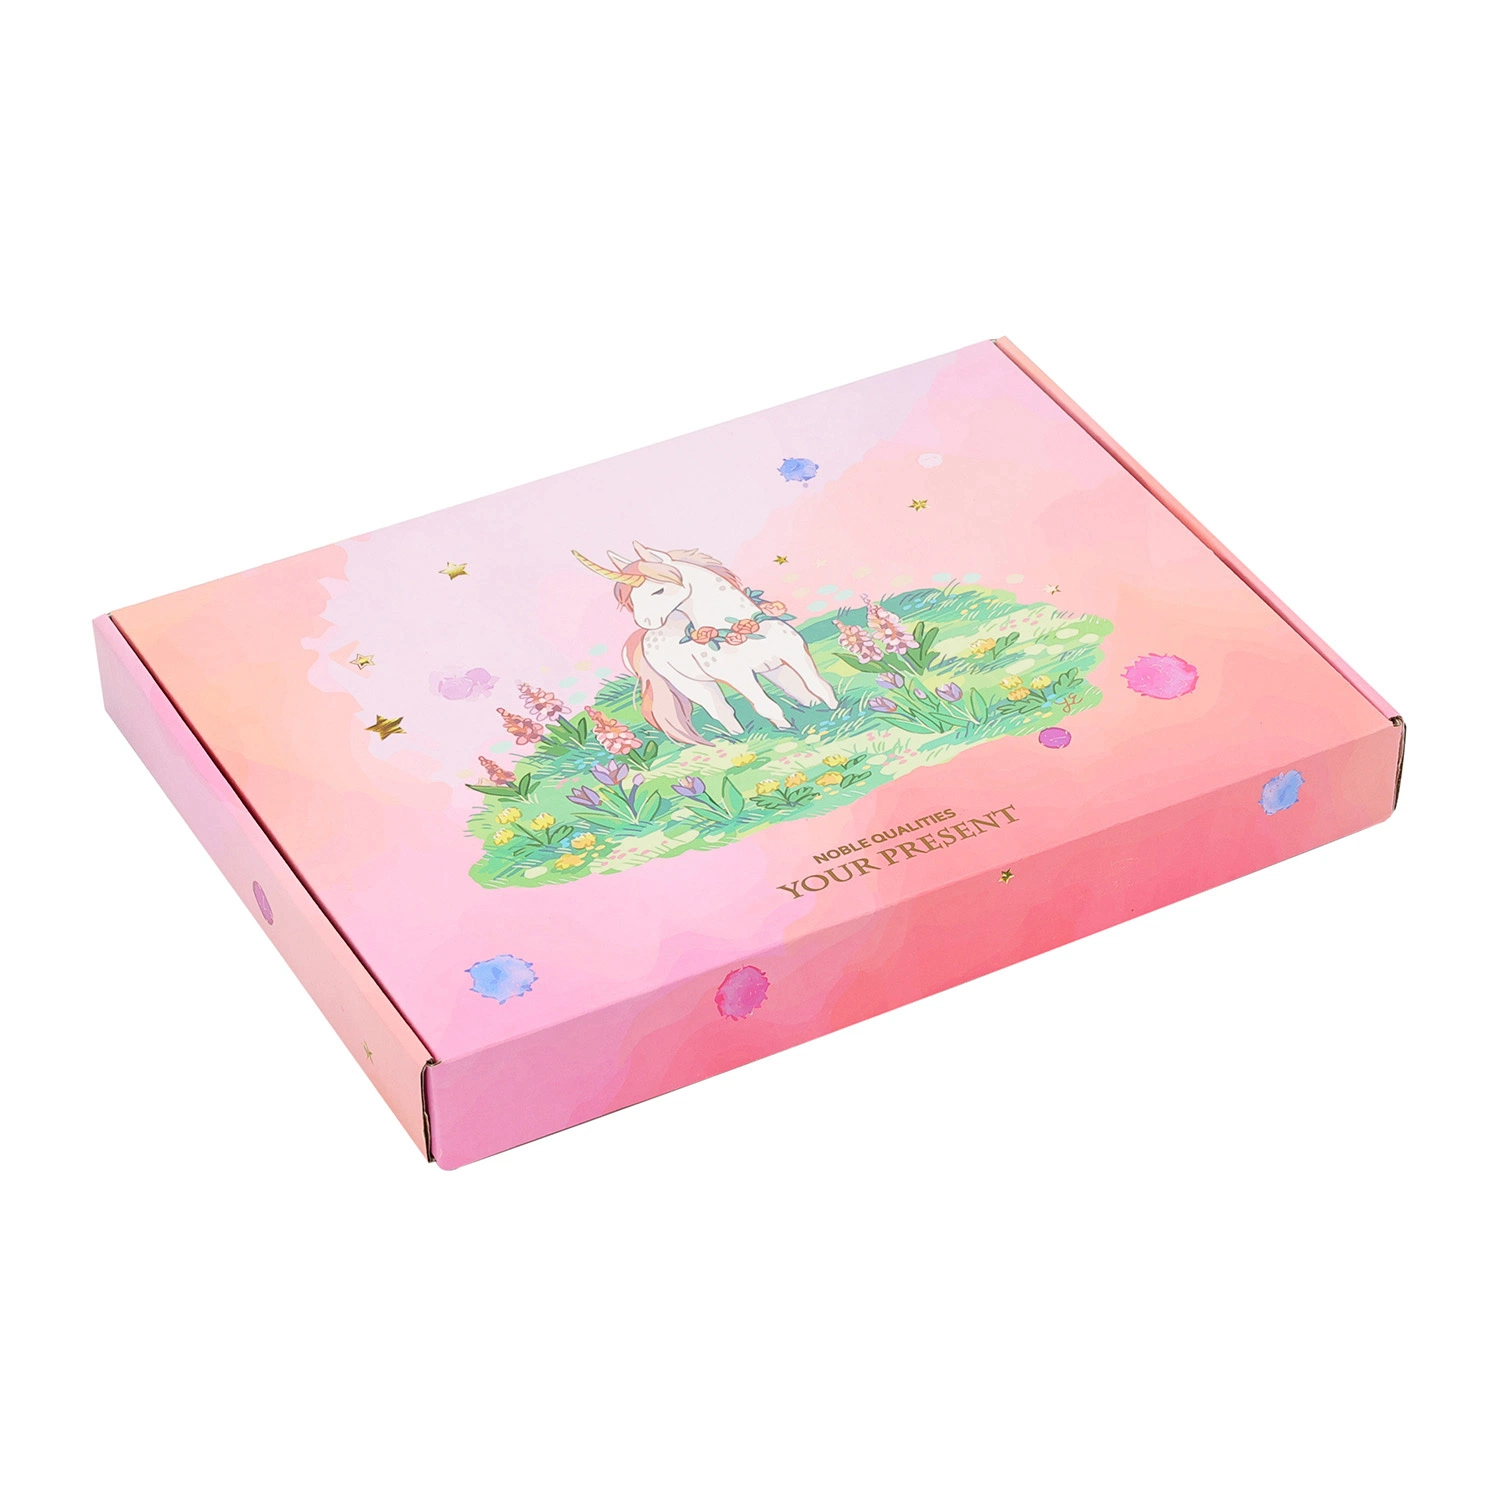 Full Color Printing Cell Phone Accessories Retail Packaging Box Blister Insert Tray Mobile Accessories Packaging Paper Box